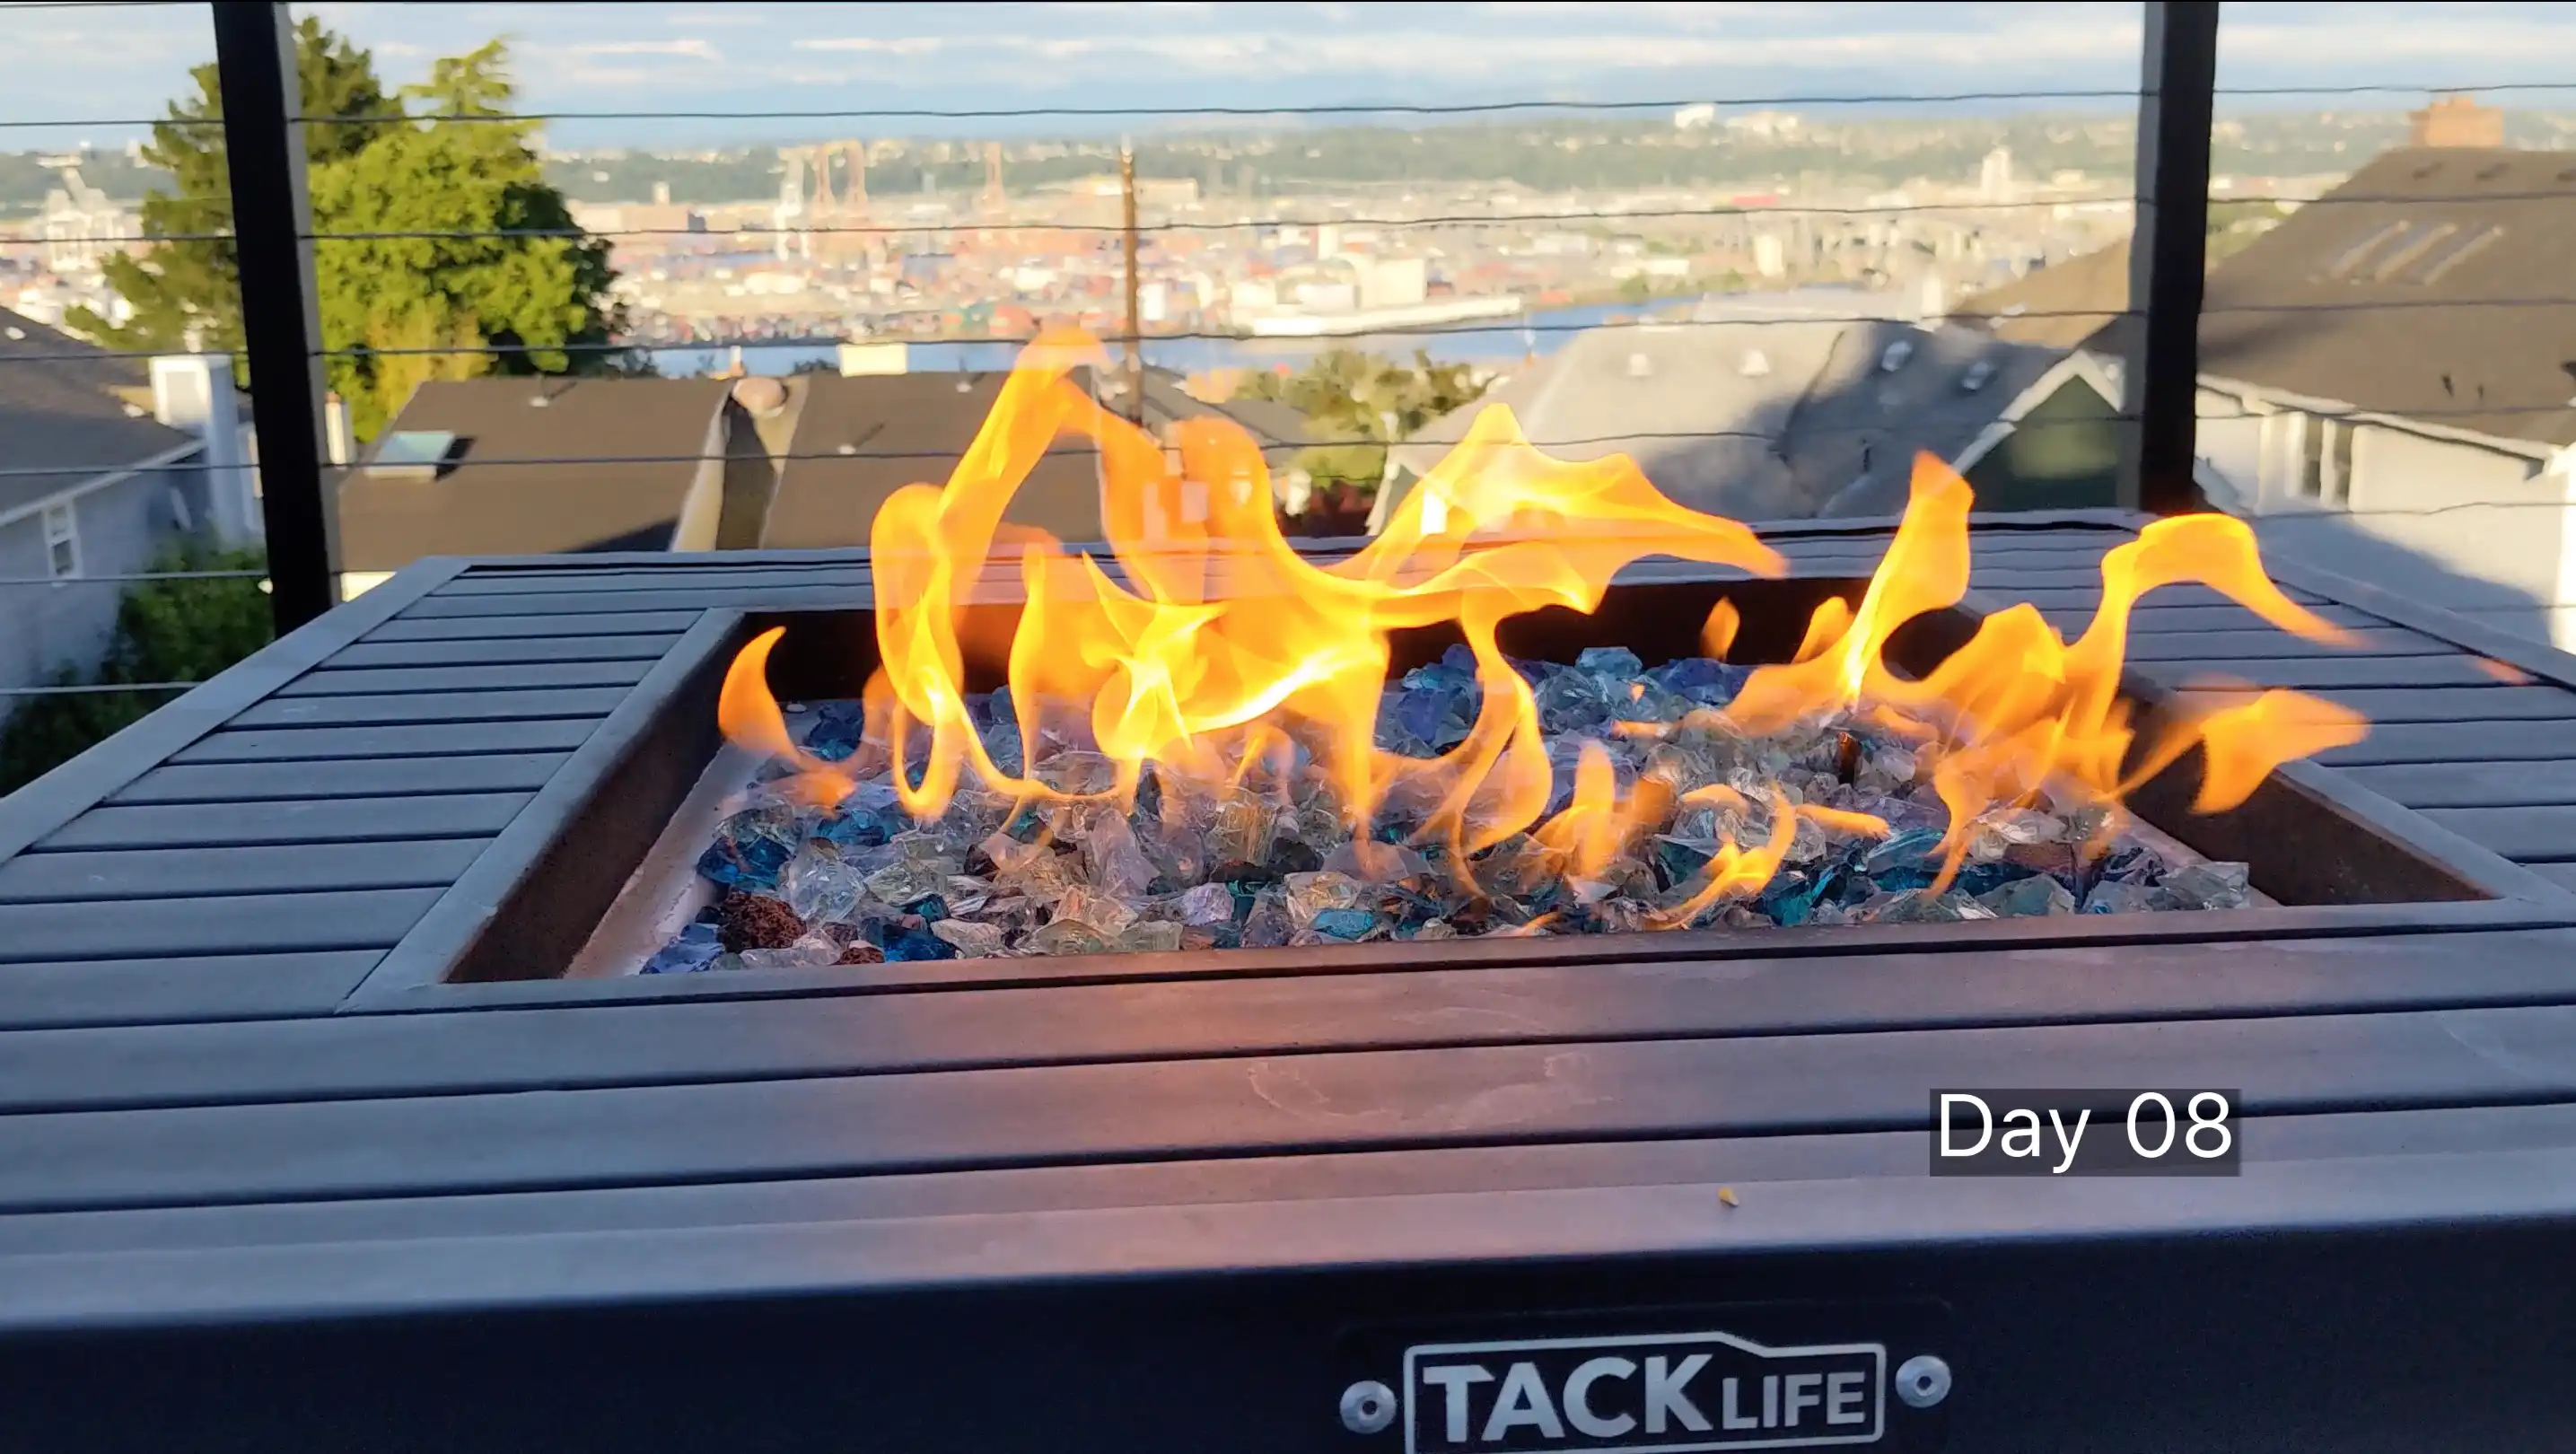 Firepit with Seattle cityview in background